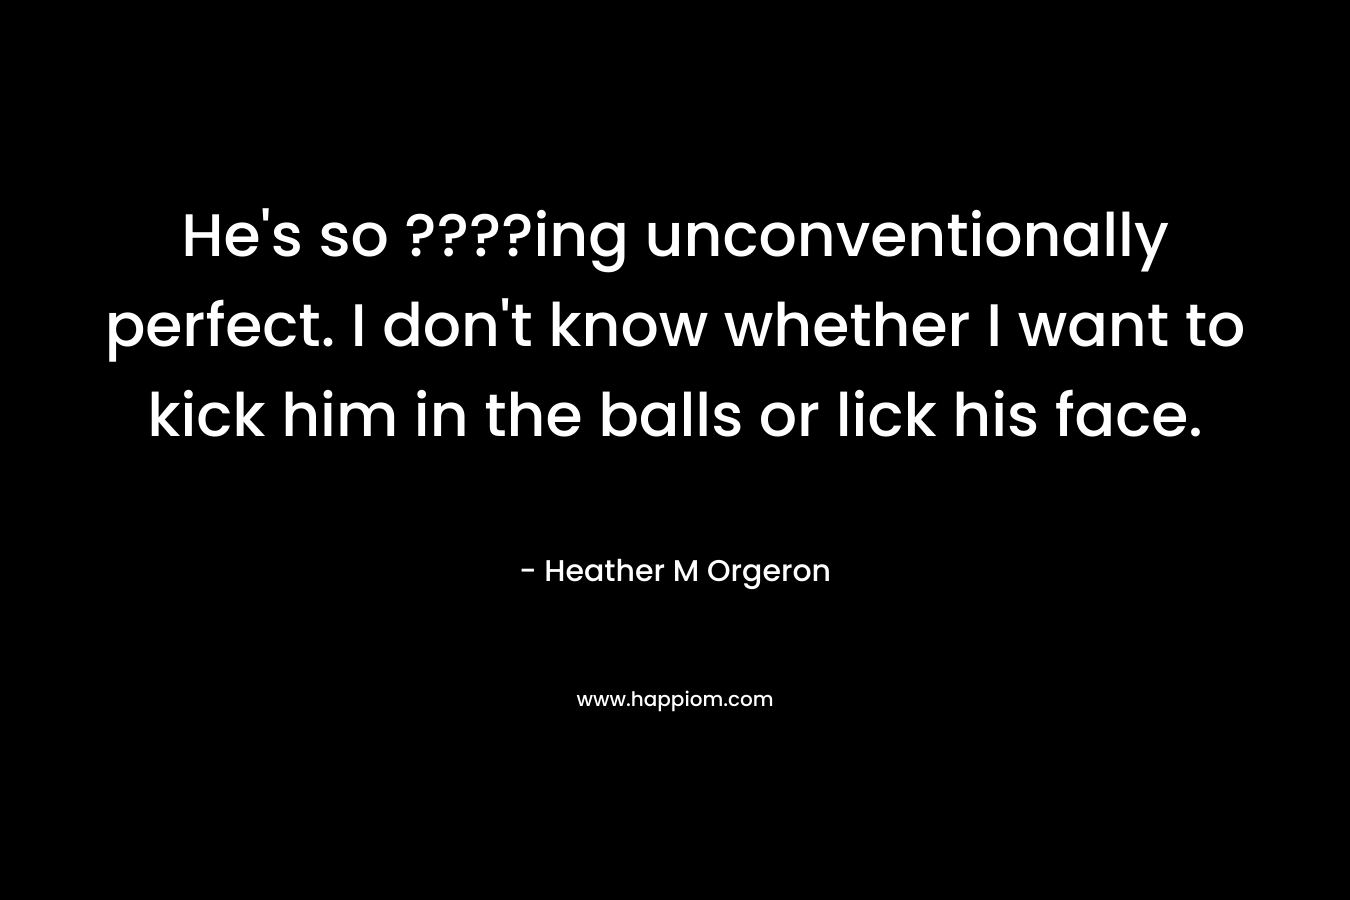 He’s so ????ing unconventionally perfect. I don’t know whether I want to kick him in the balls or lick his face. – Heather M Orgeron